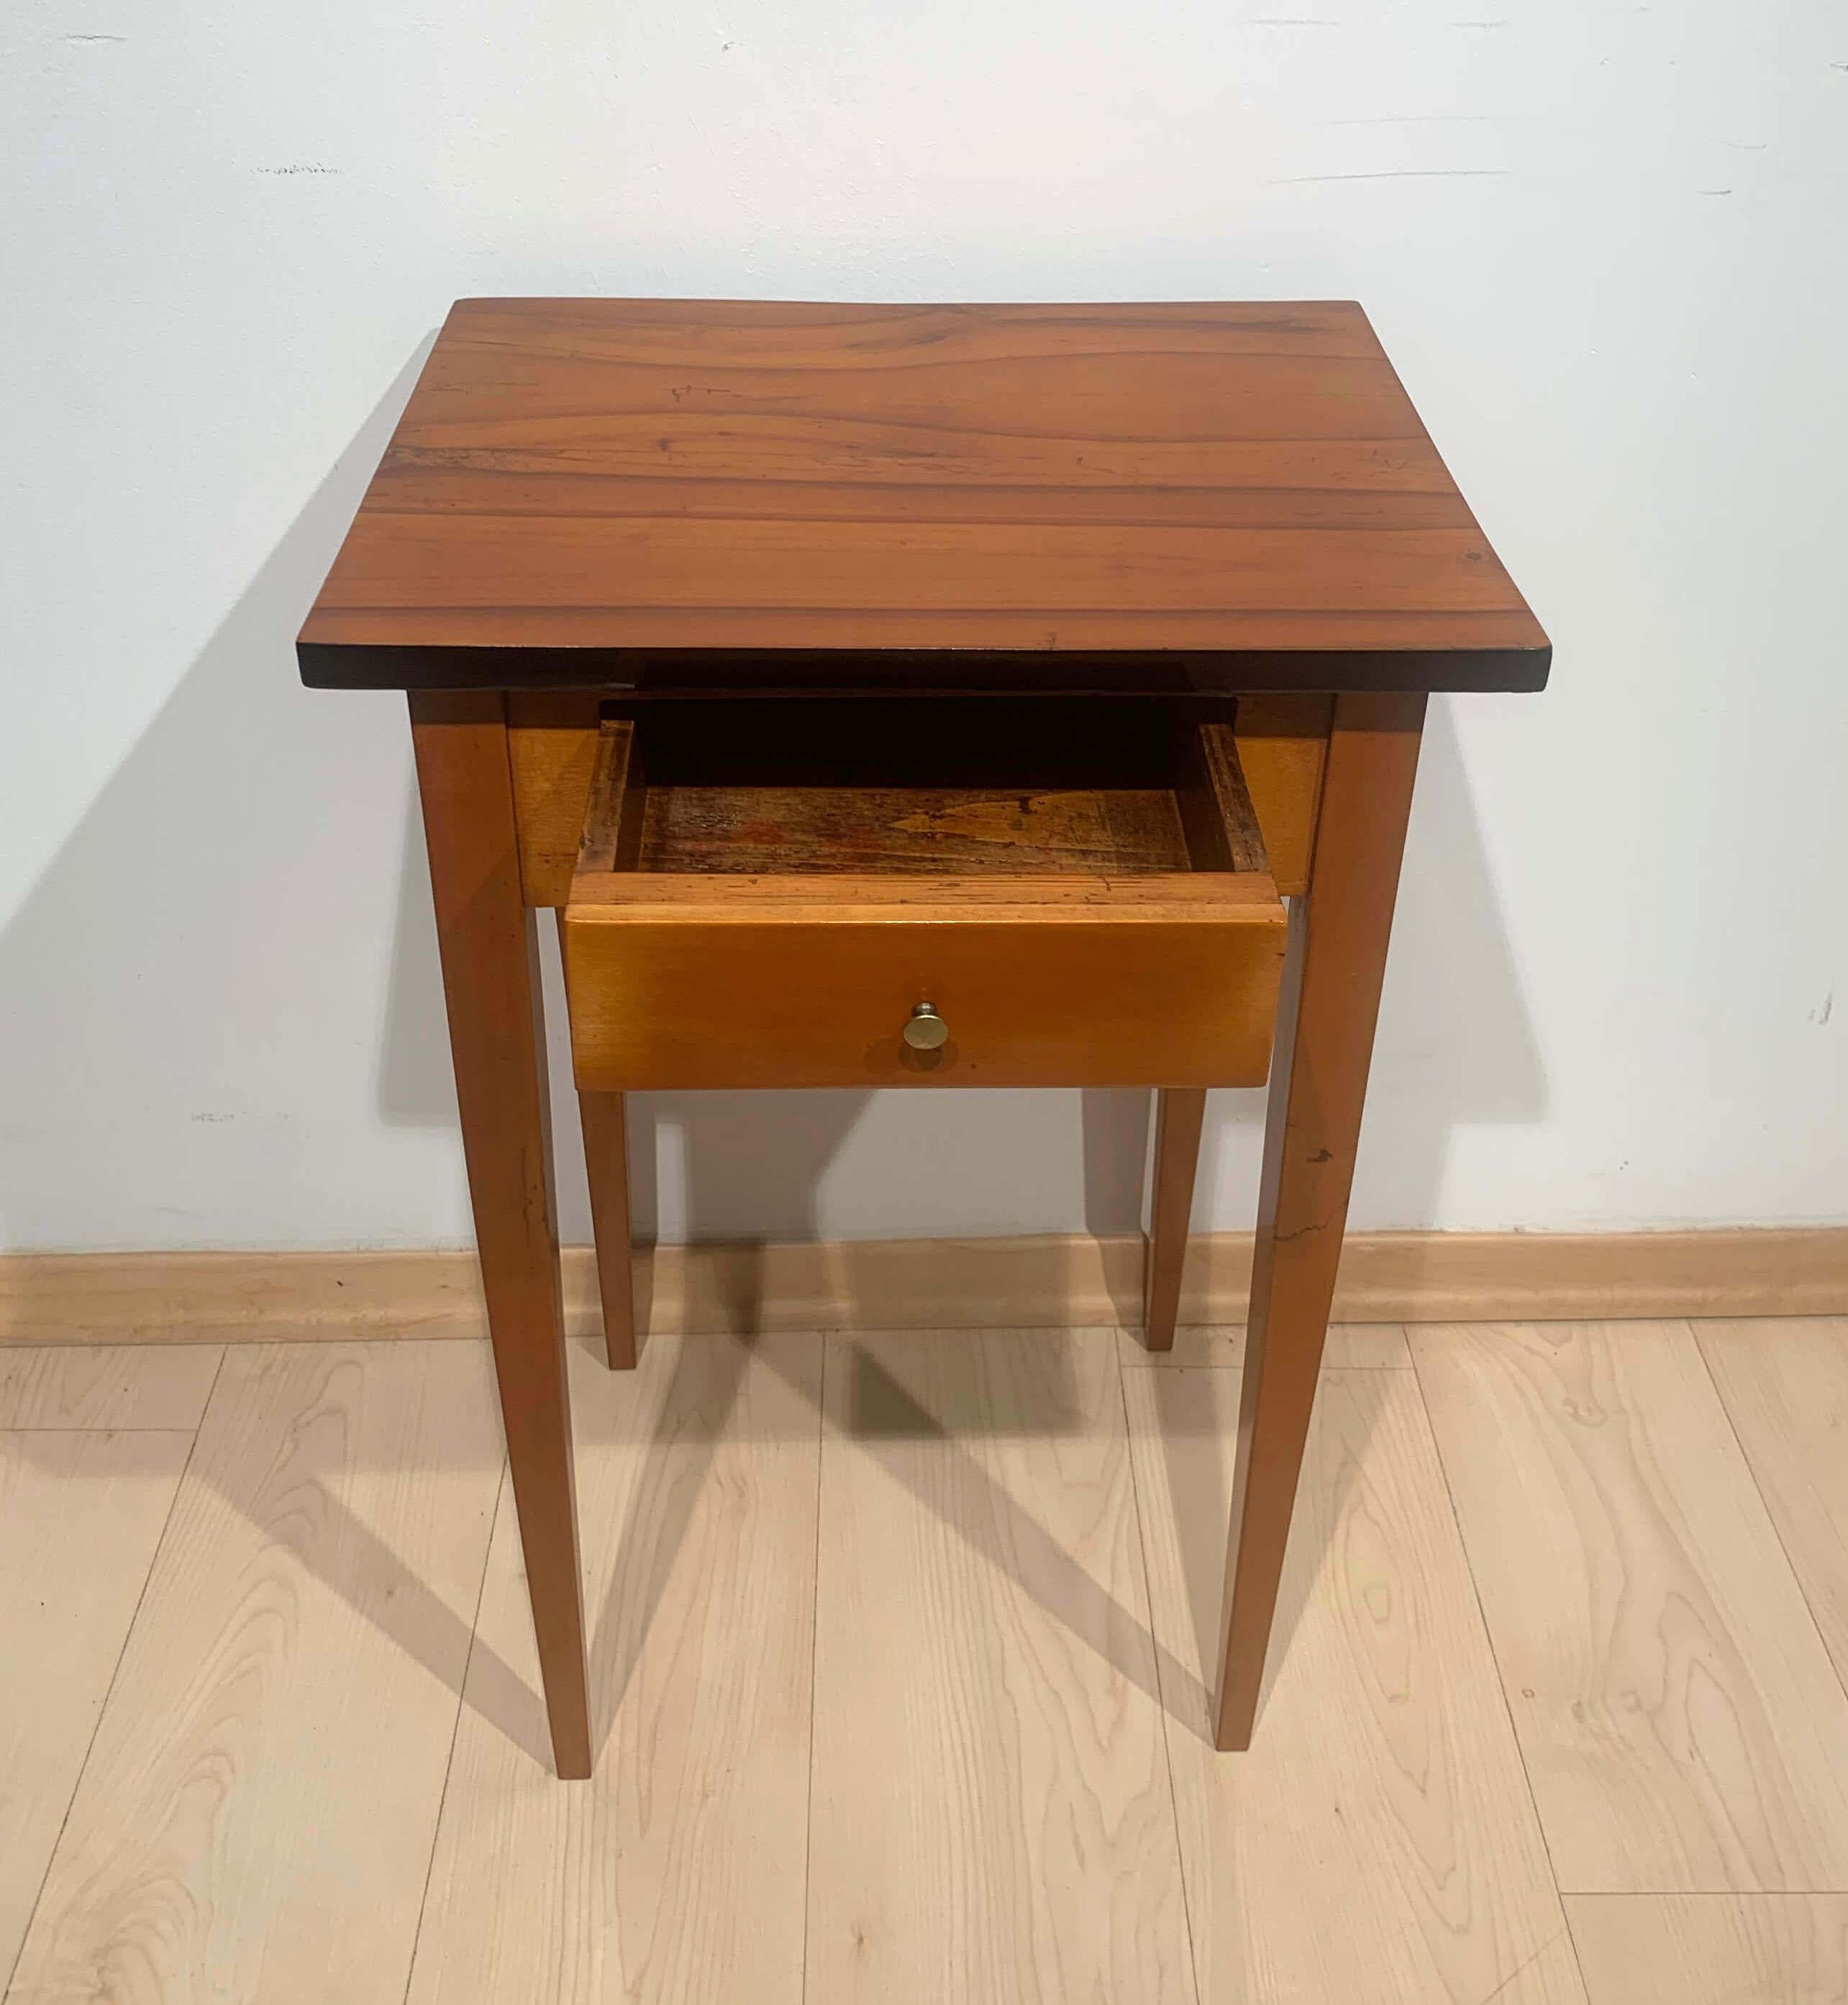 Early 19th Century Biedermeier Side Table with Drawer, Cherry Wood, South Germany, circa 1830